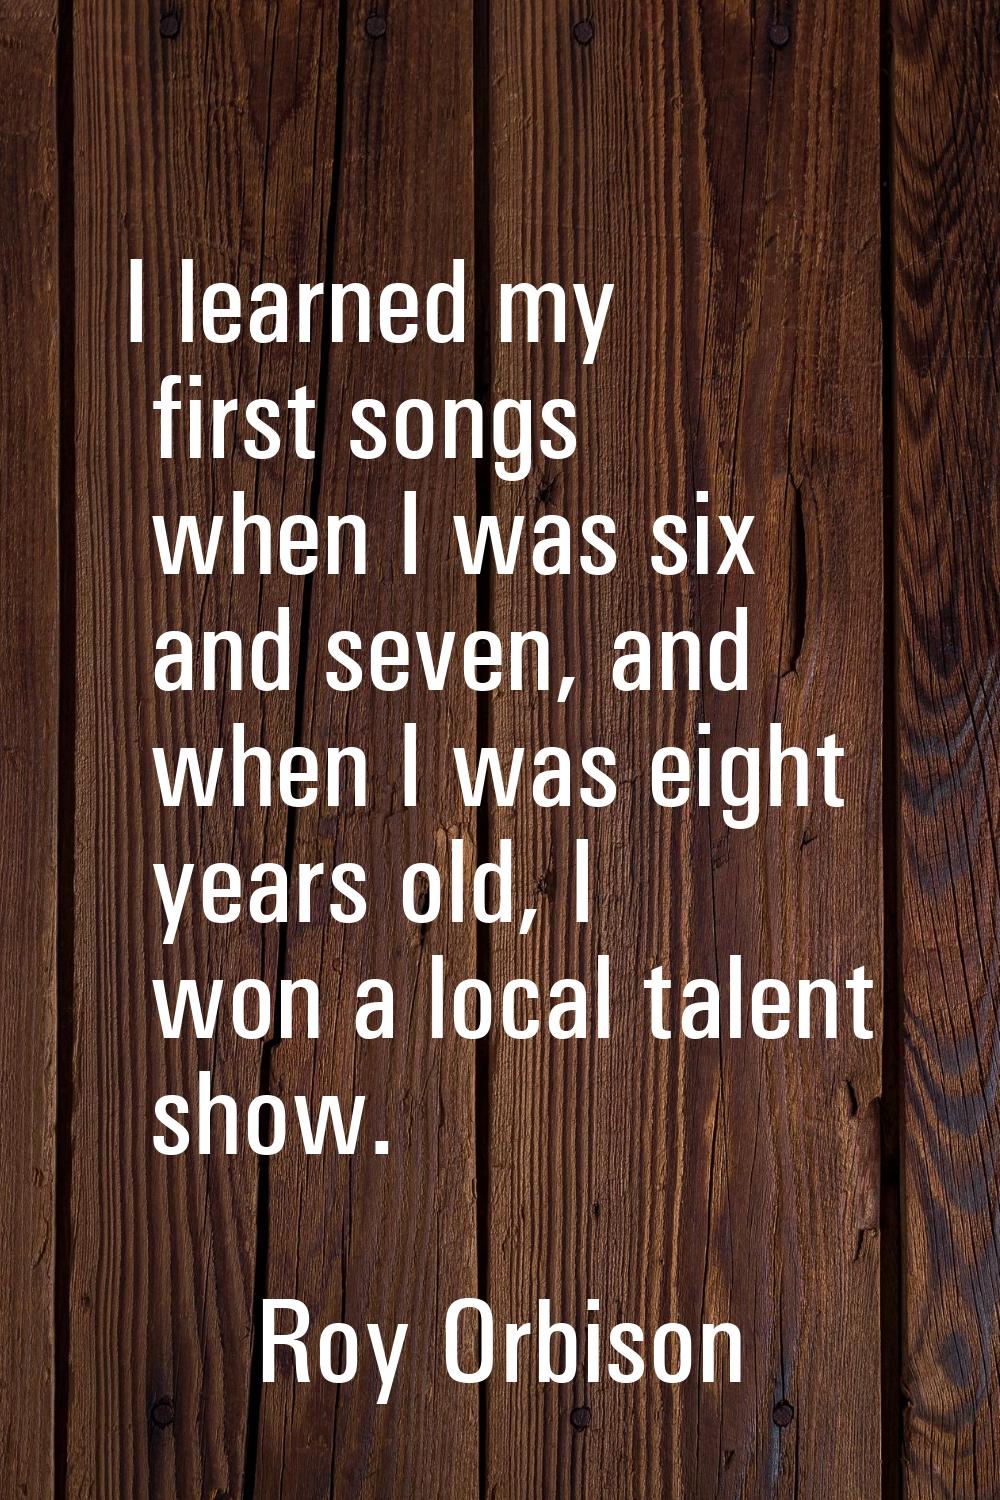 I learned my first songs when I was six and seven, and when I was eight years old, I won a local ta